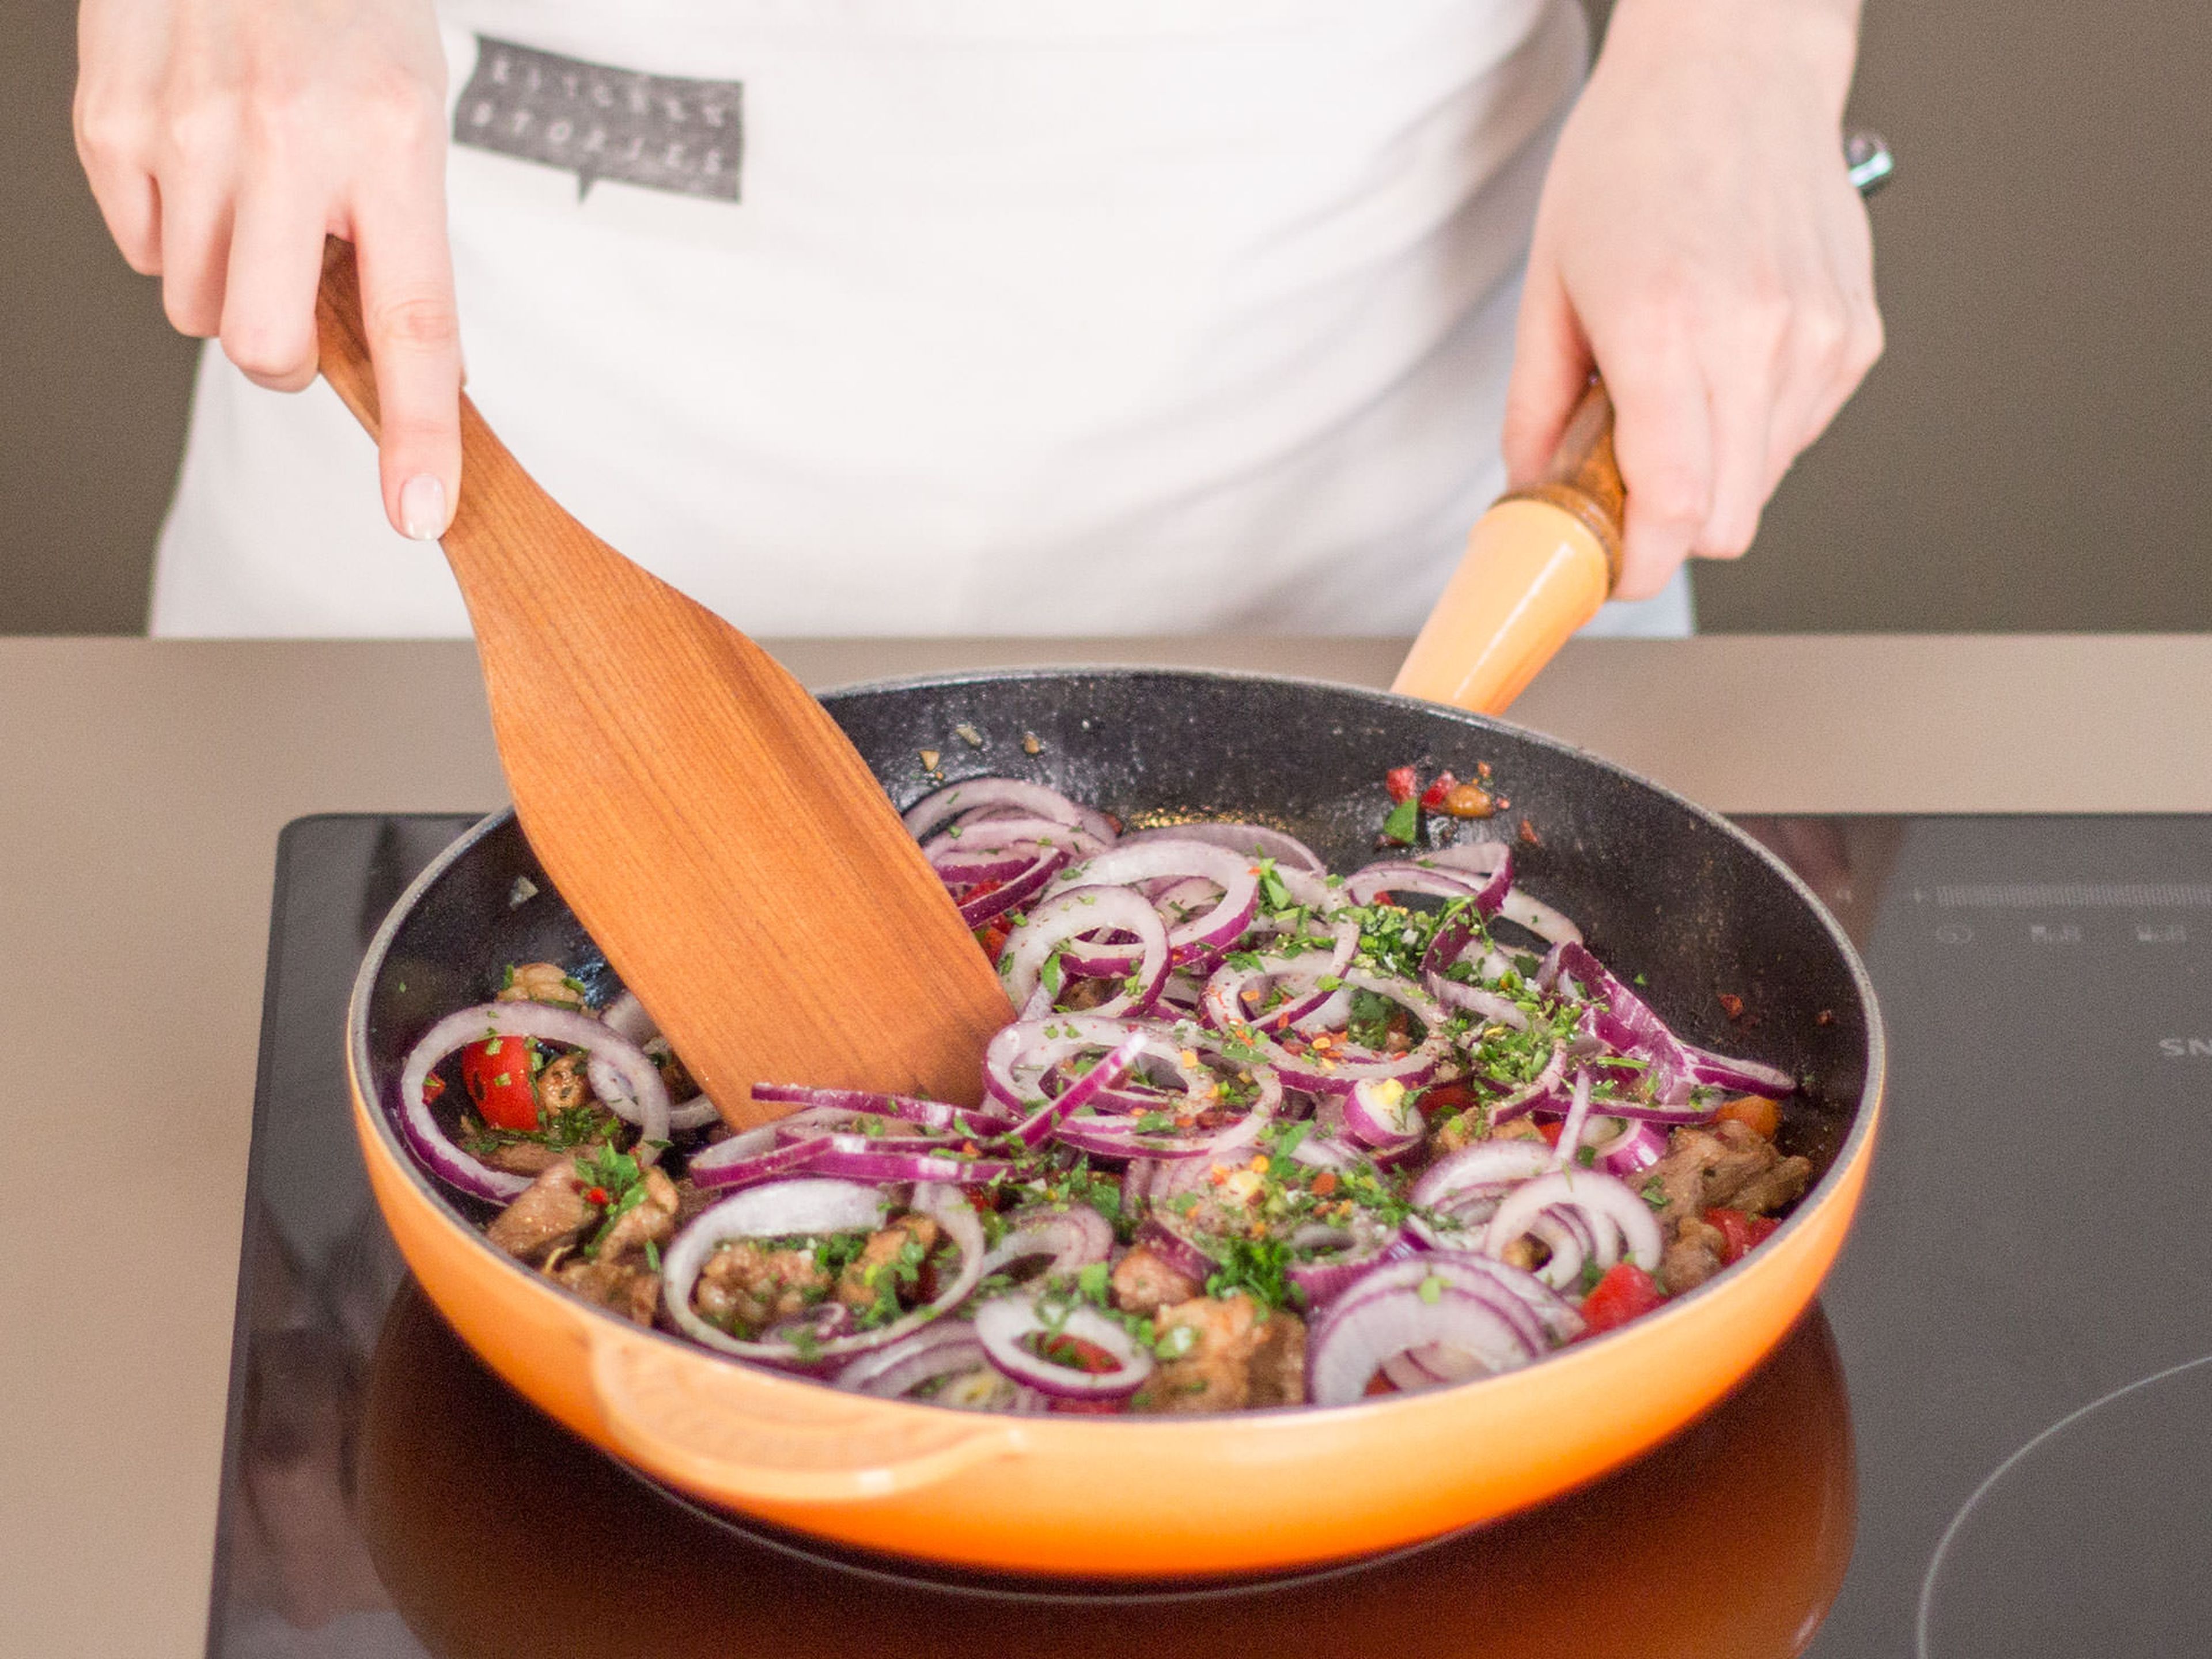 In a large frying pan, sauté meat in some vegetable oil over medium heat for approximately 3 – 4 min. Then, add chili and rest of the garlic and continue to cook for another 1 – 2 min. Finally, add onion and bell pepper, stir well to combine, and cook for another 2 – 3 min. Remove from heat and season to taste with salt, pepper, and paprika powder. Garnish with oregano and serve with tzatziki on the side. Enjoy!